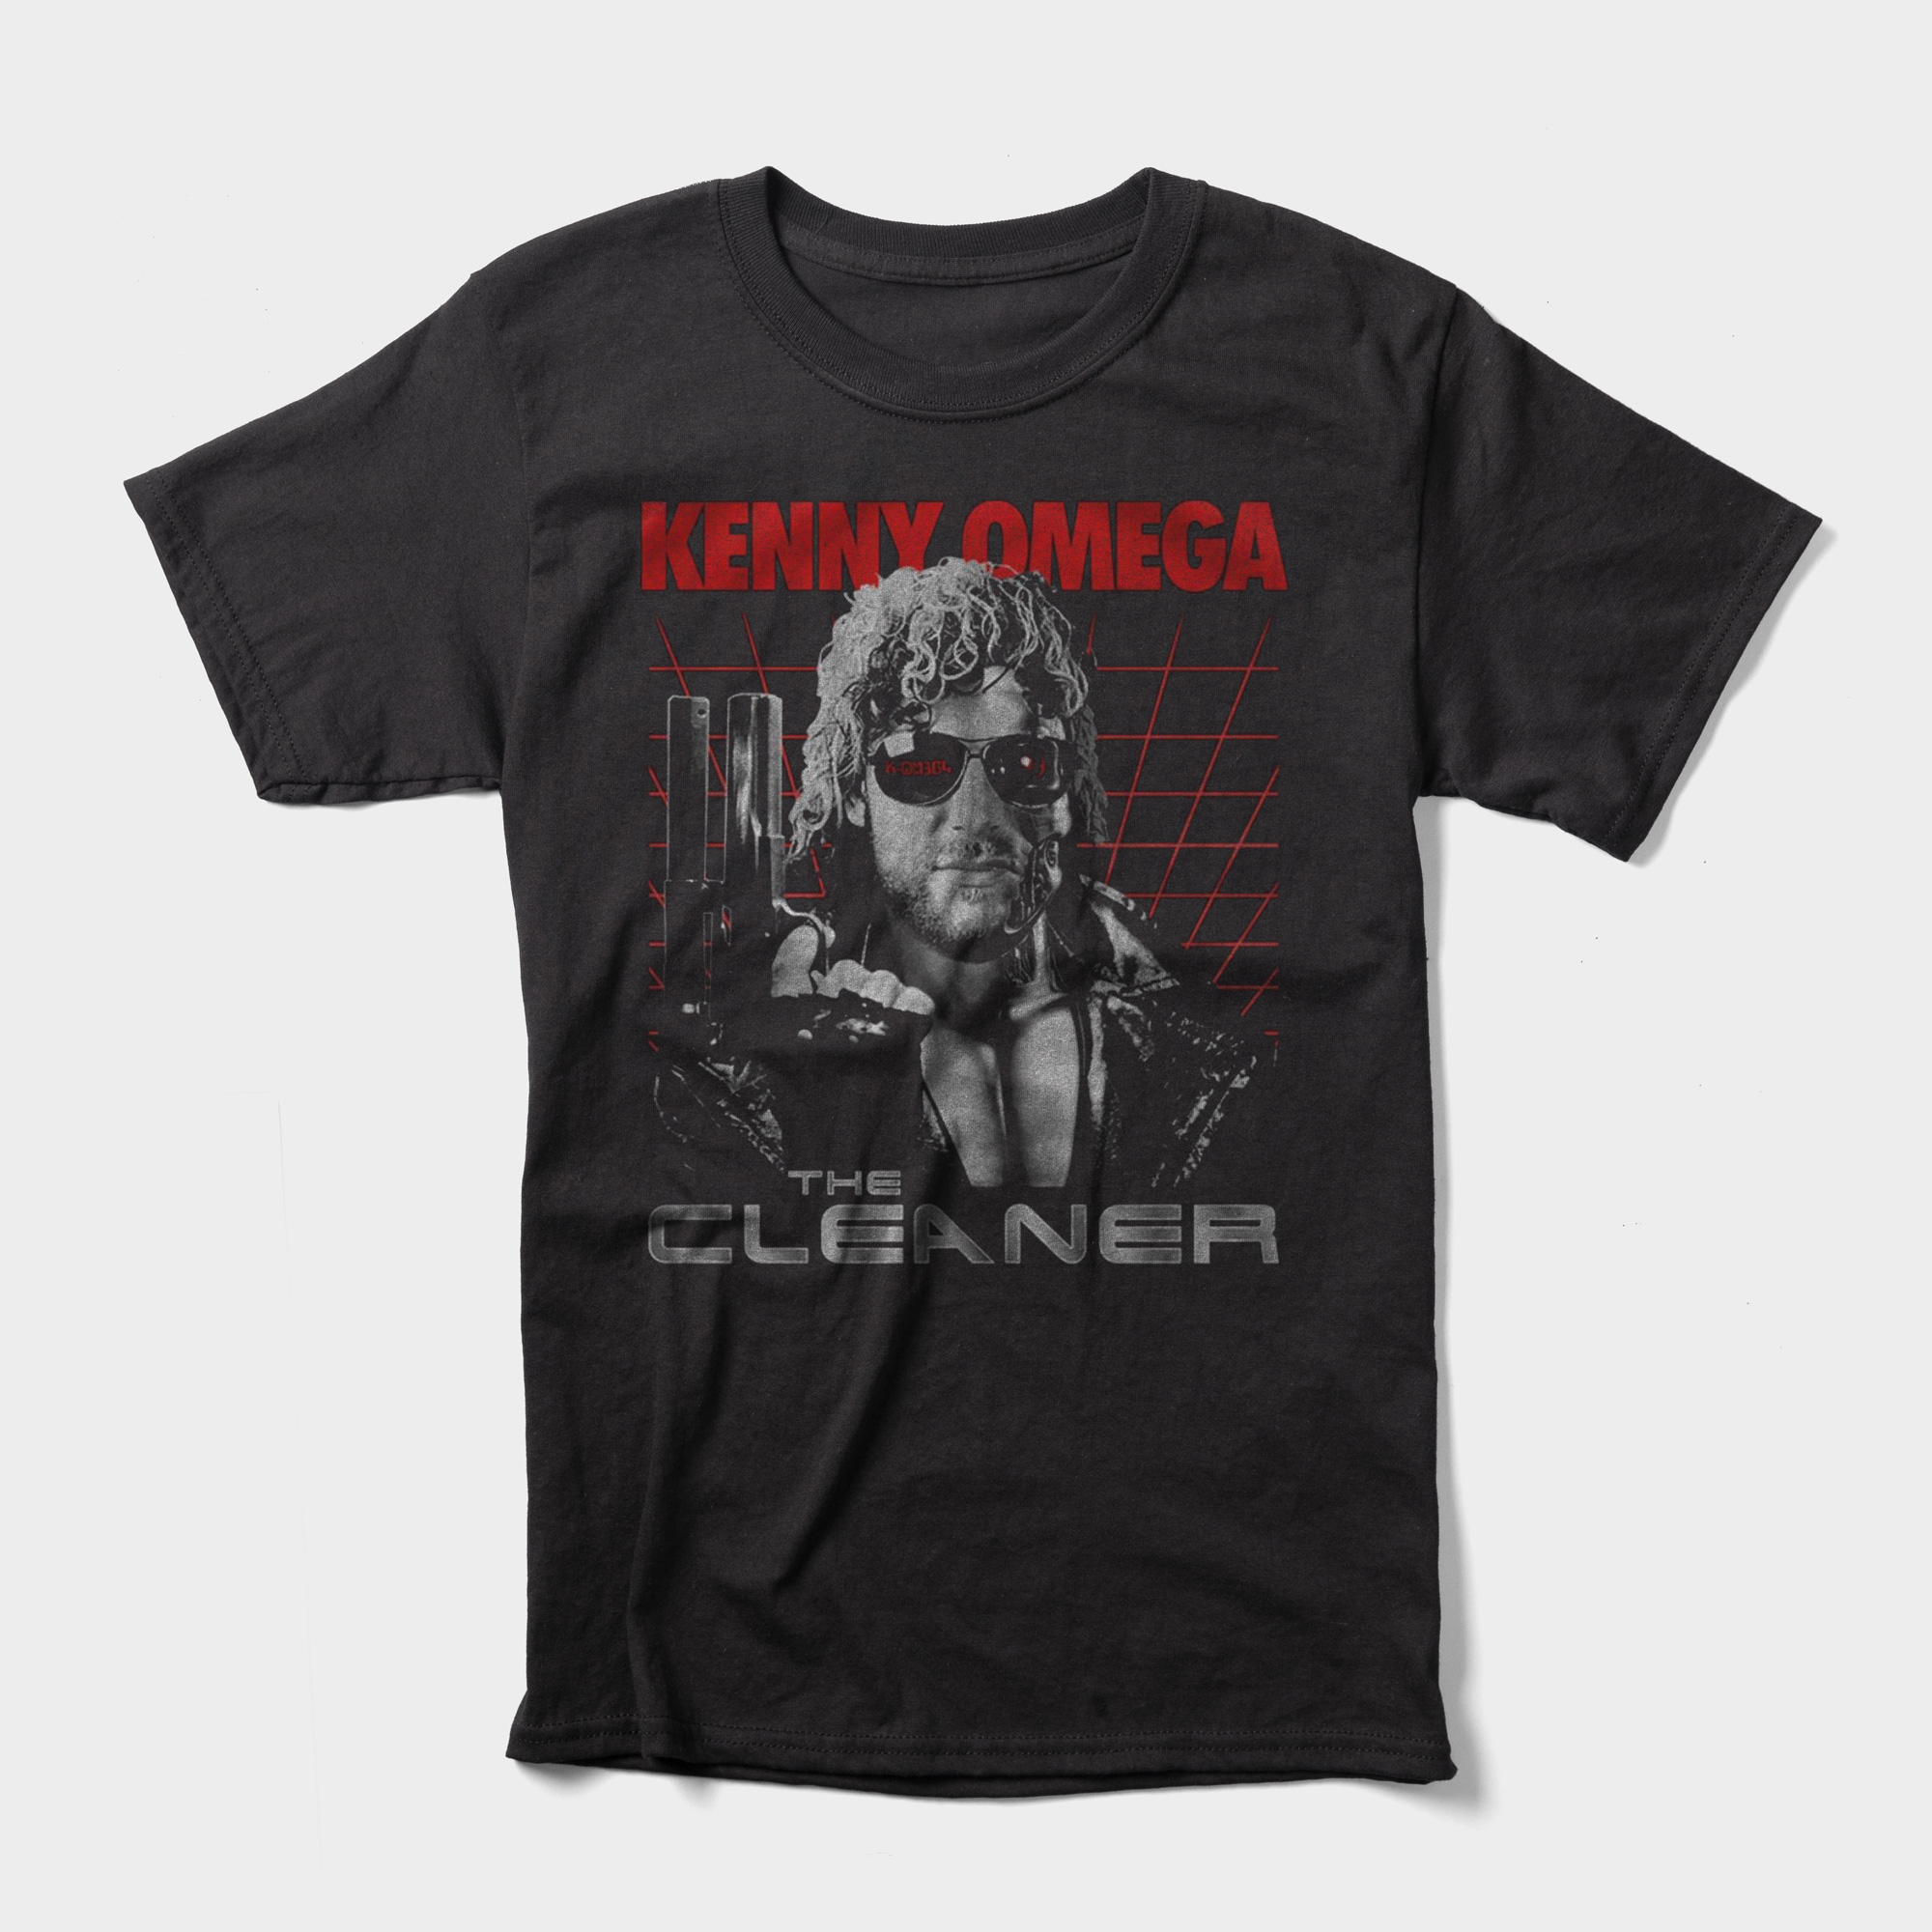 Kenny Omega's t-shirt features an illustration of himself as The Terminator with the text "The Cleaner" beneath it. 